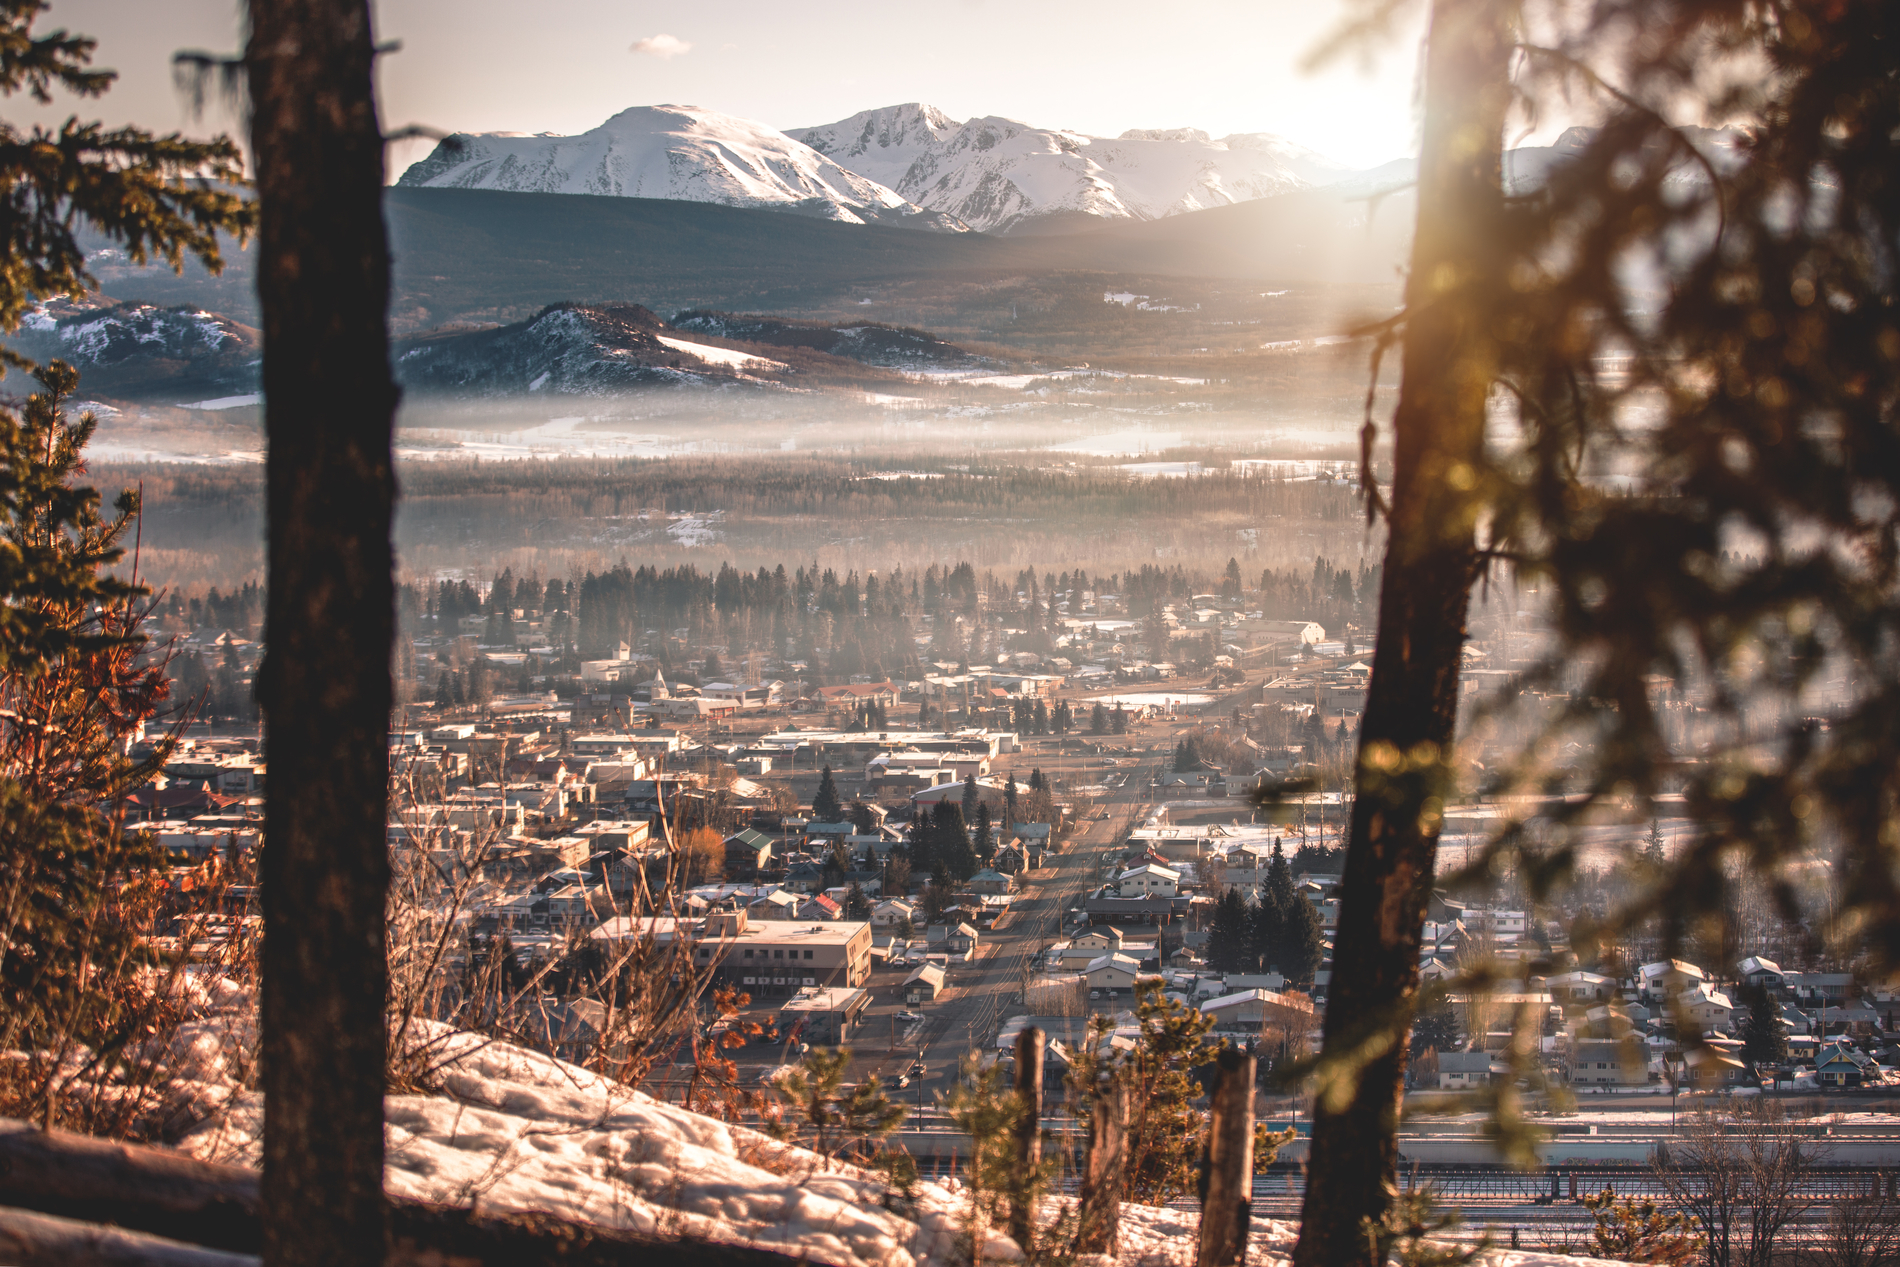 A look down at the town of Smithers in the winter from a high vantage point. The town is dusted in snow and there is a large mountain range in the background.